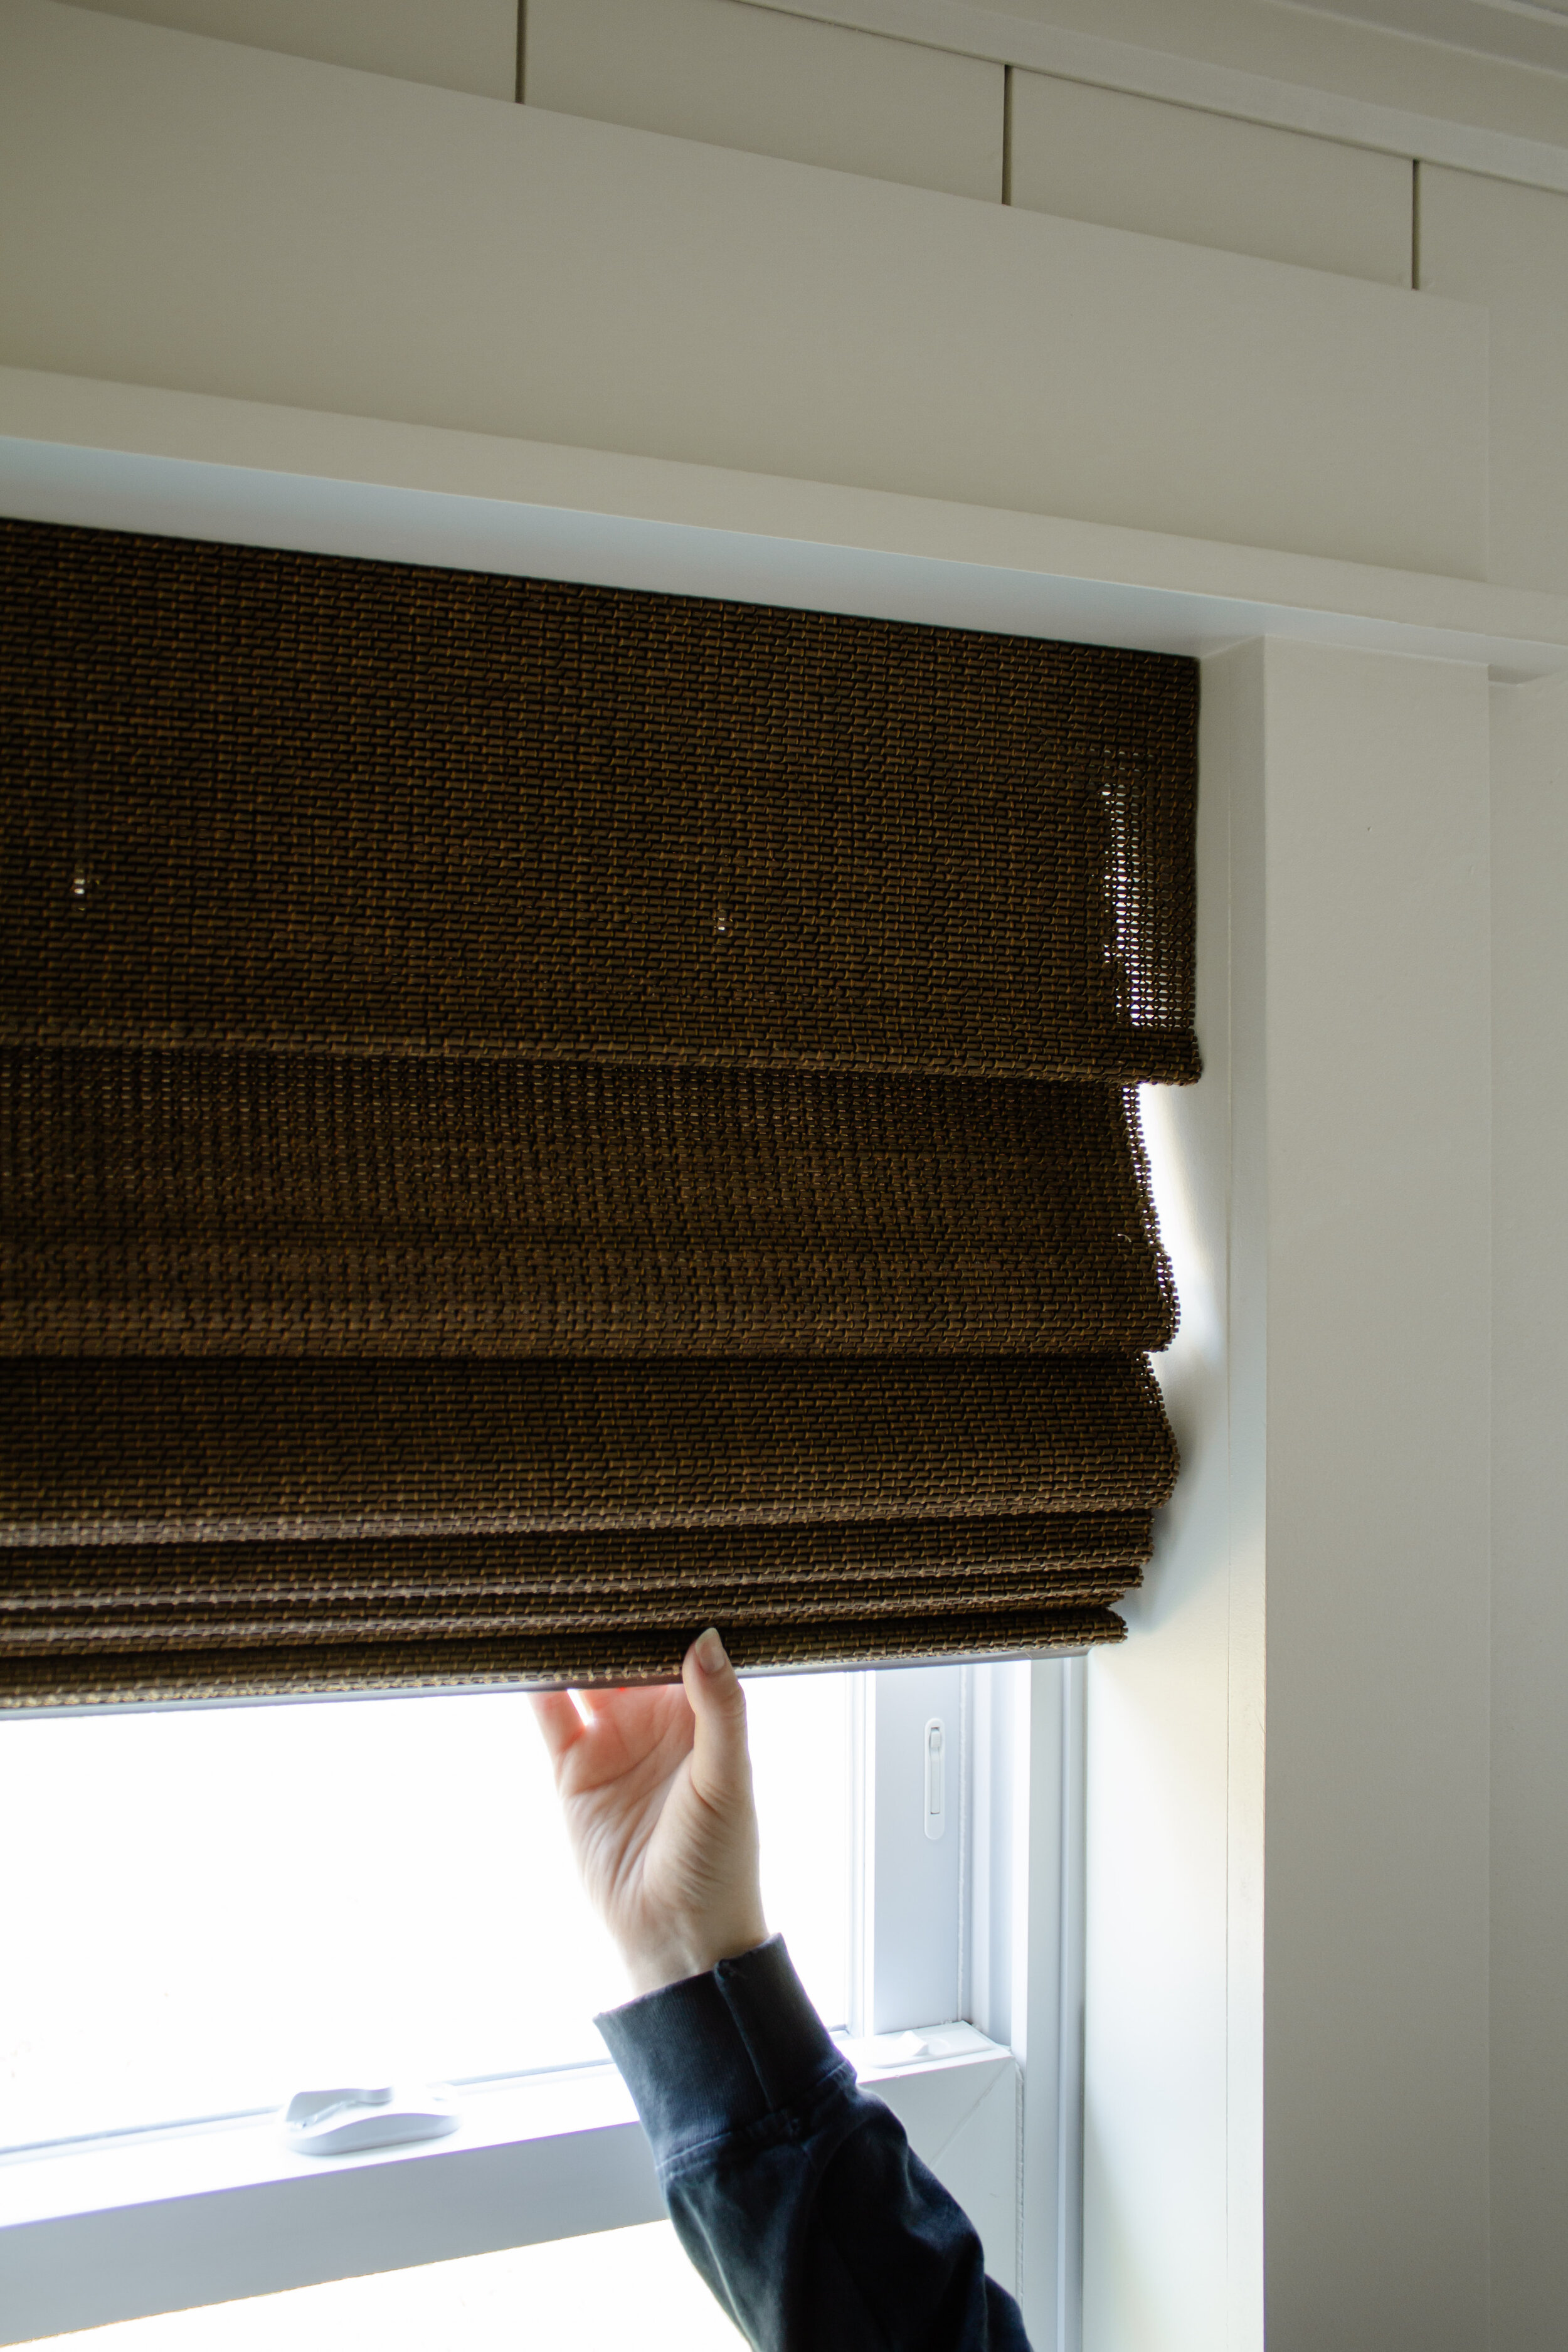 FAQ And Honest Review Of Our Bali Natural Woven Roman Shades | Nadine Stay - Where to buy custom blinds and shades. Natural wood woven shade in a dark brown color. Modern cabin bedroom styling and window covering tips.